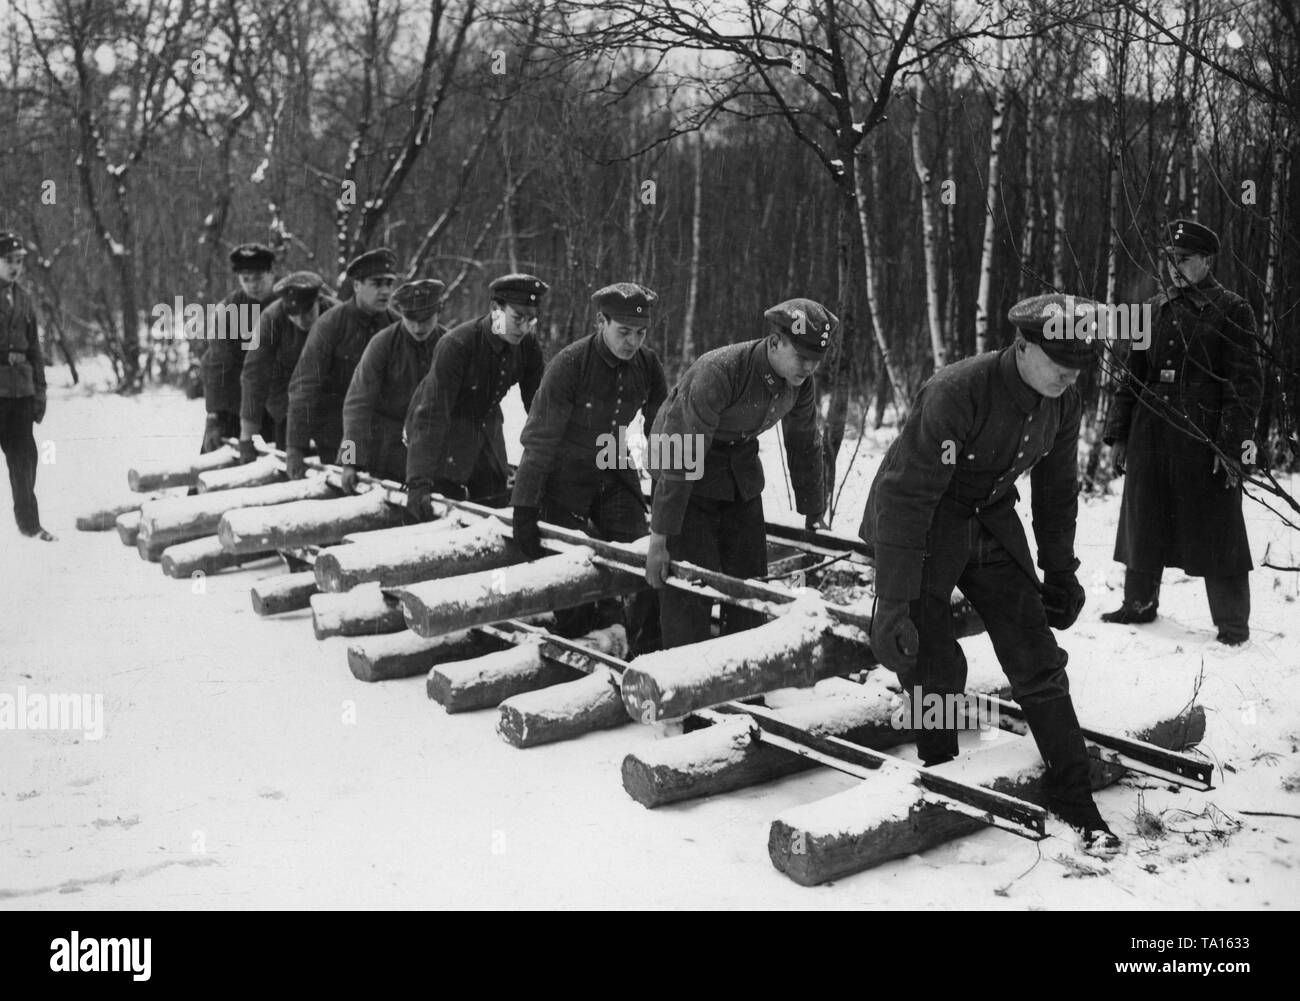 Men of the Voluntary Work Service of Stahlhelm, are building rails in Haselhorst near Spandau, prseumably during the construction work of the Reichsforschungssiedlung Haselhorst. Stock Photo